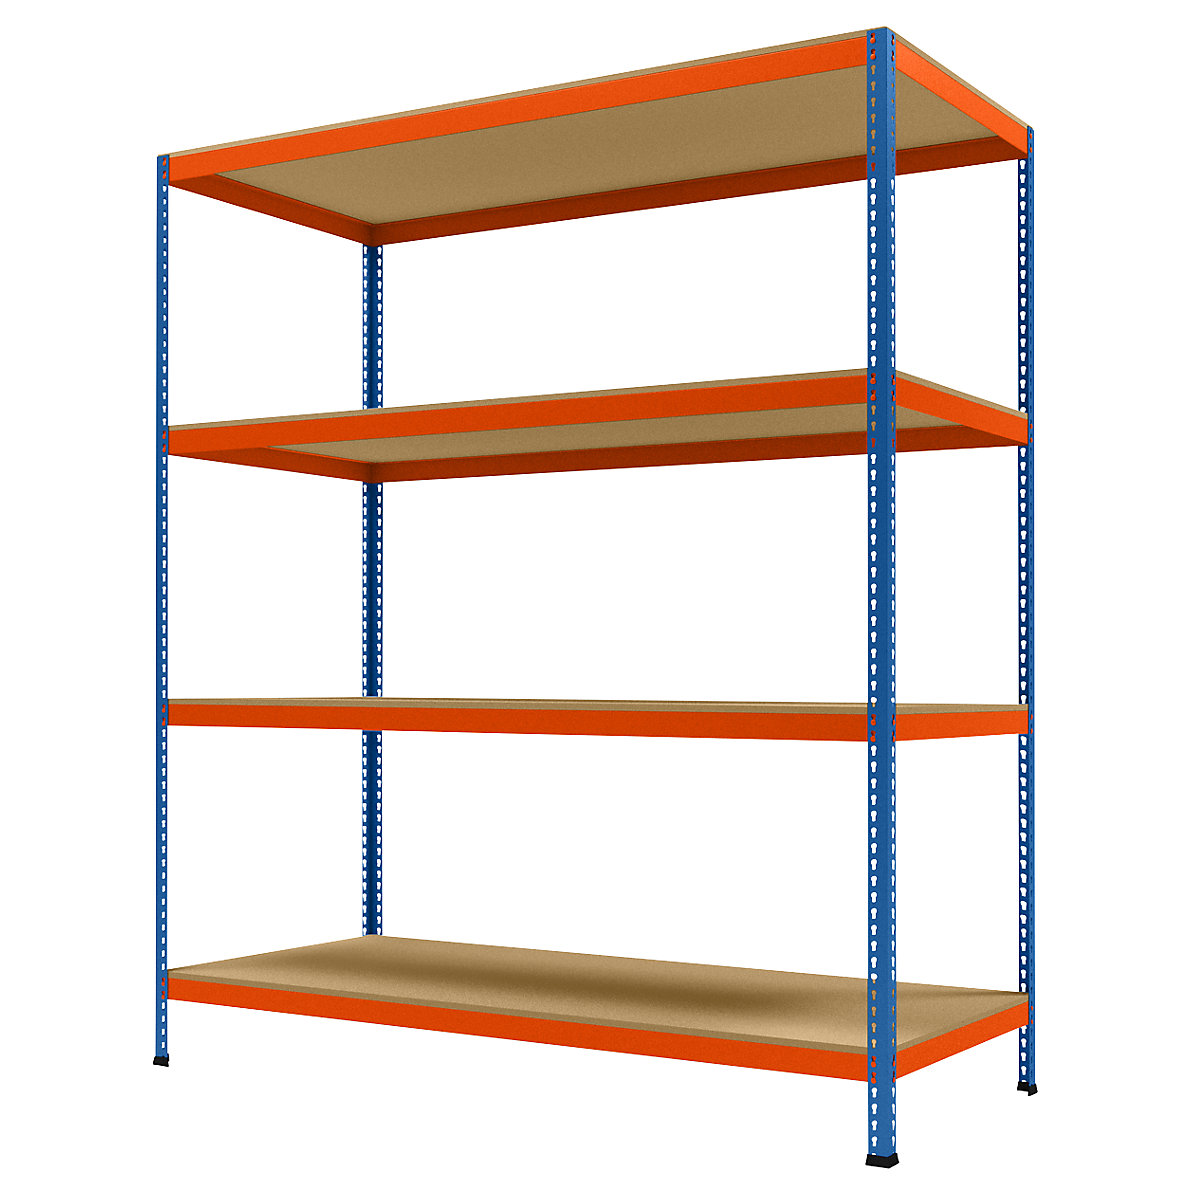 Wide span heavy duty shelving, height 2438 mm, overall depth 926 mm, width 2146 mm